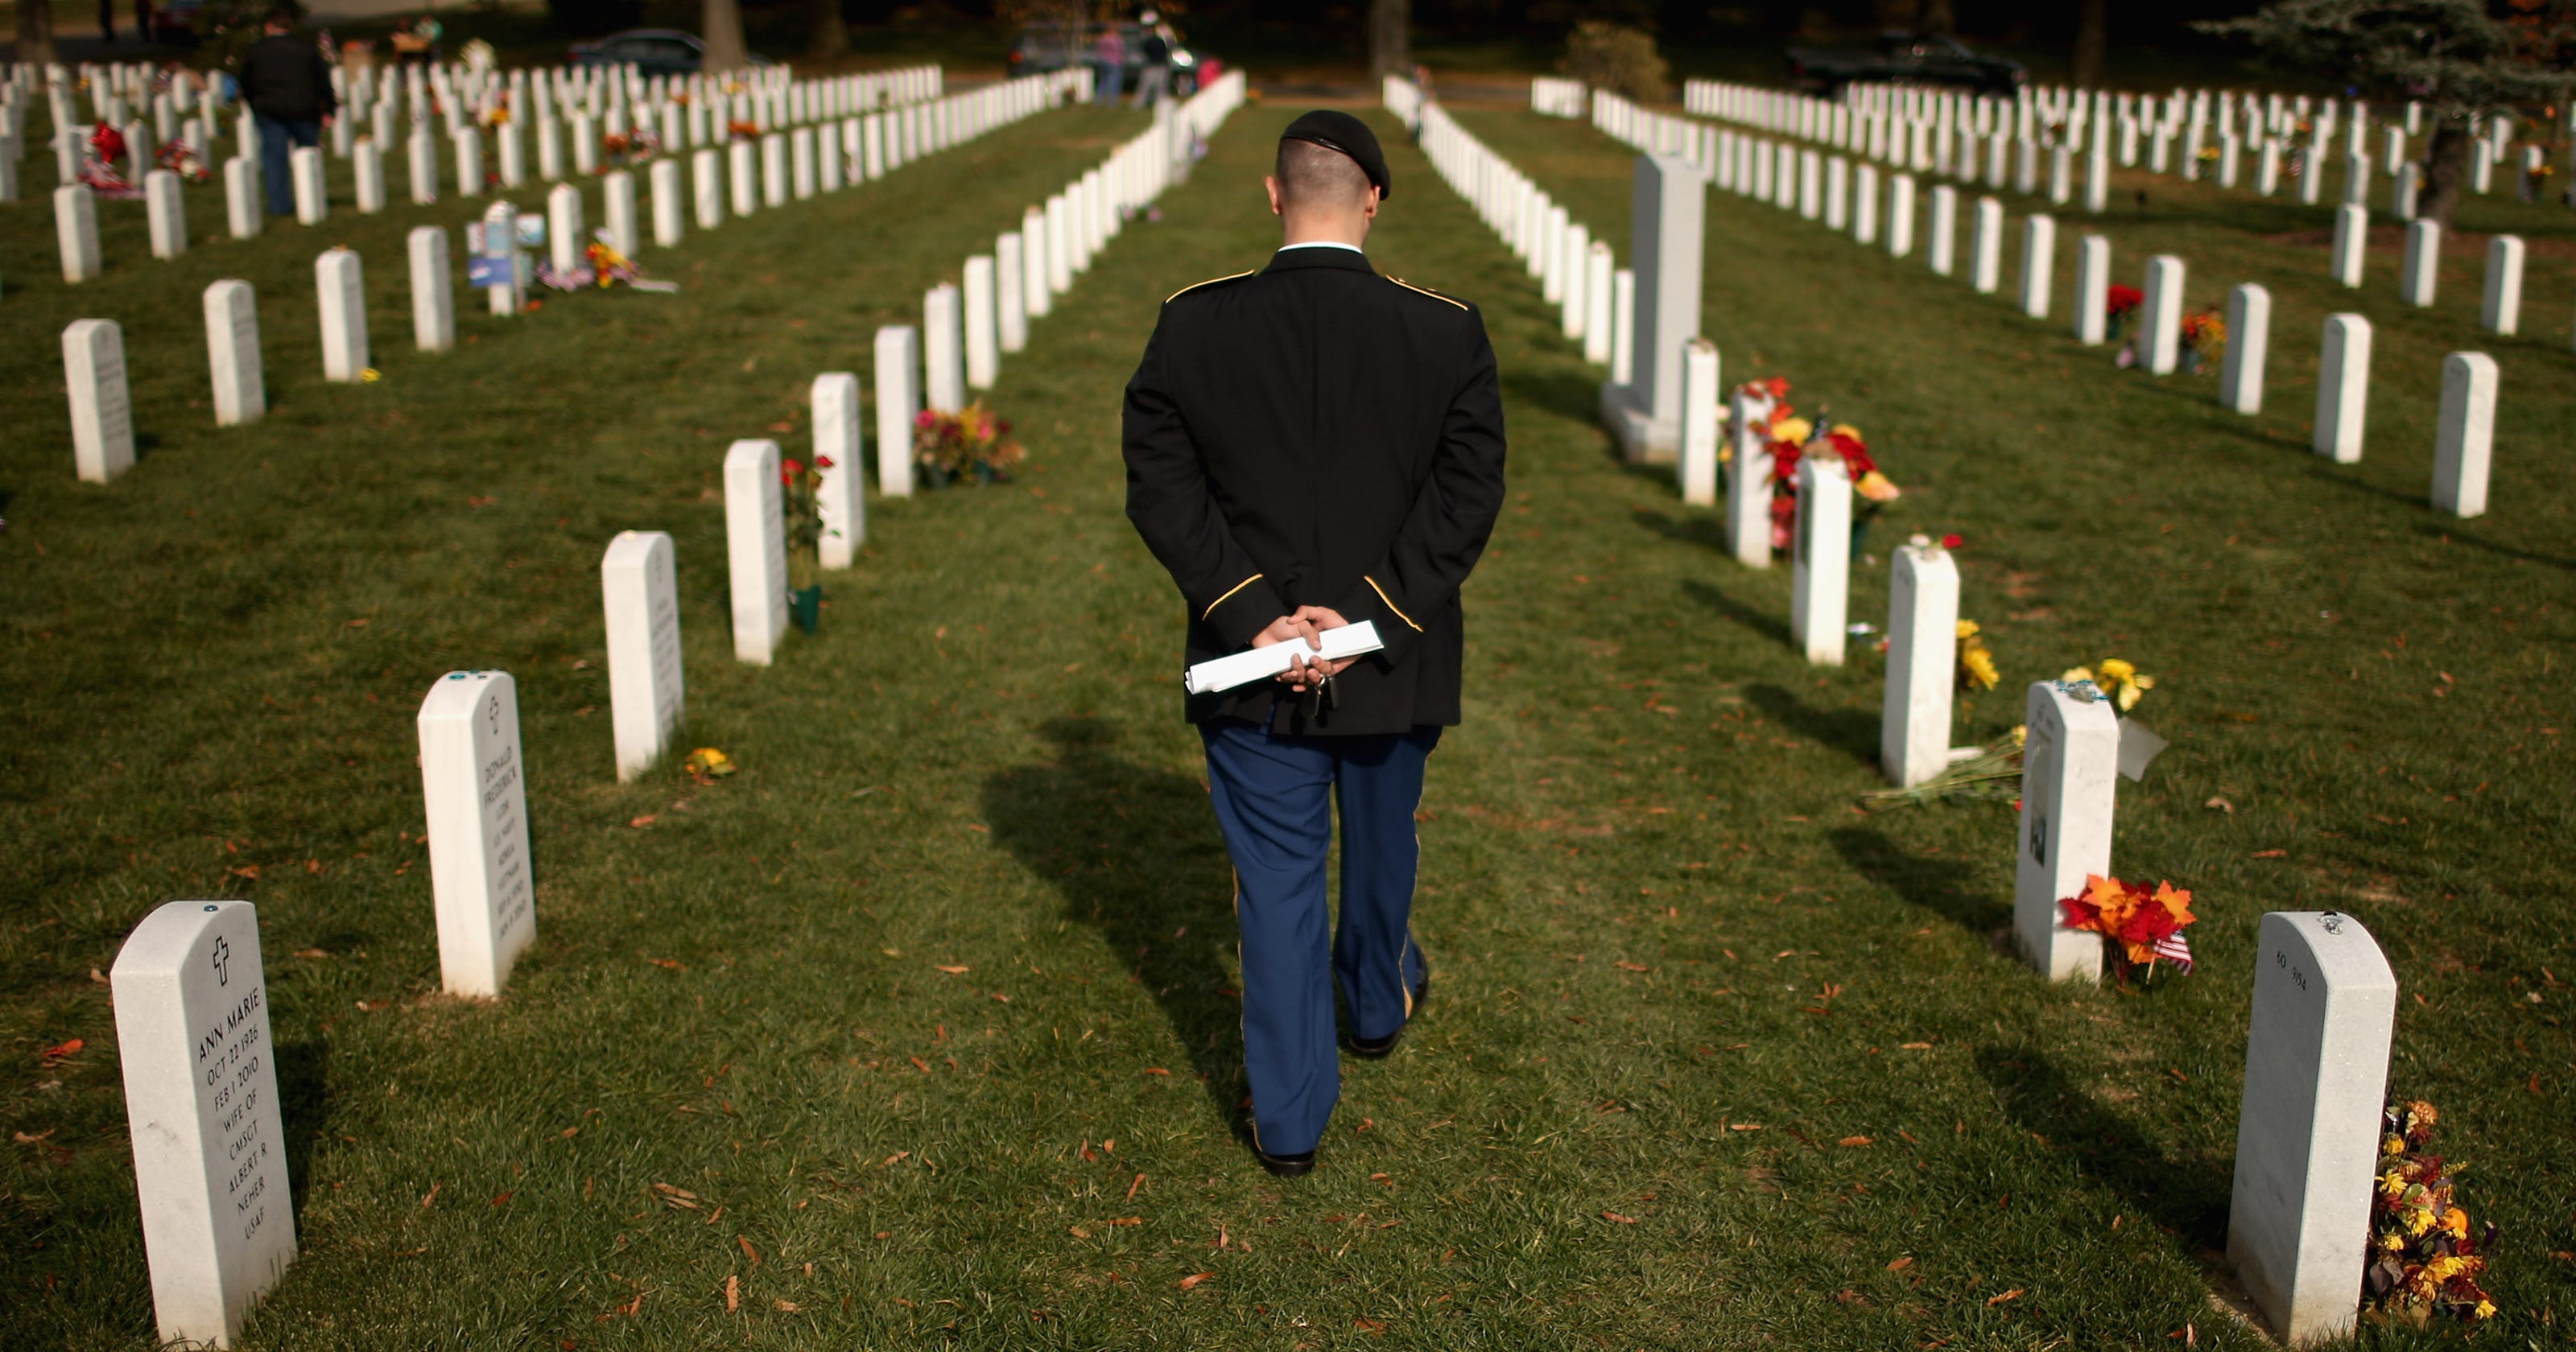 20 Veterans A Day Committed Suicide In 2014 New Data Show